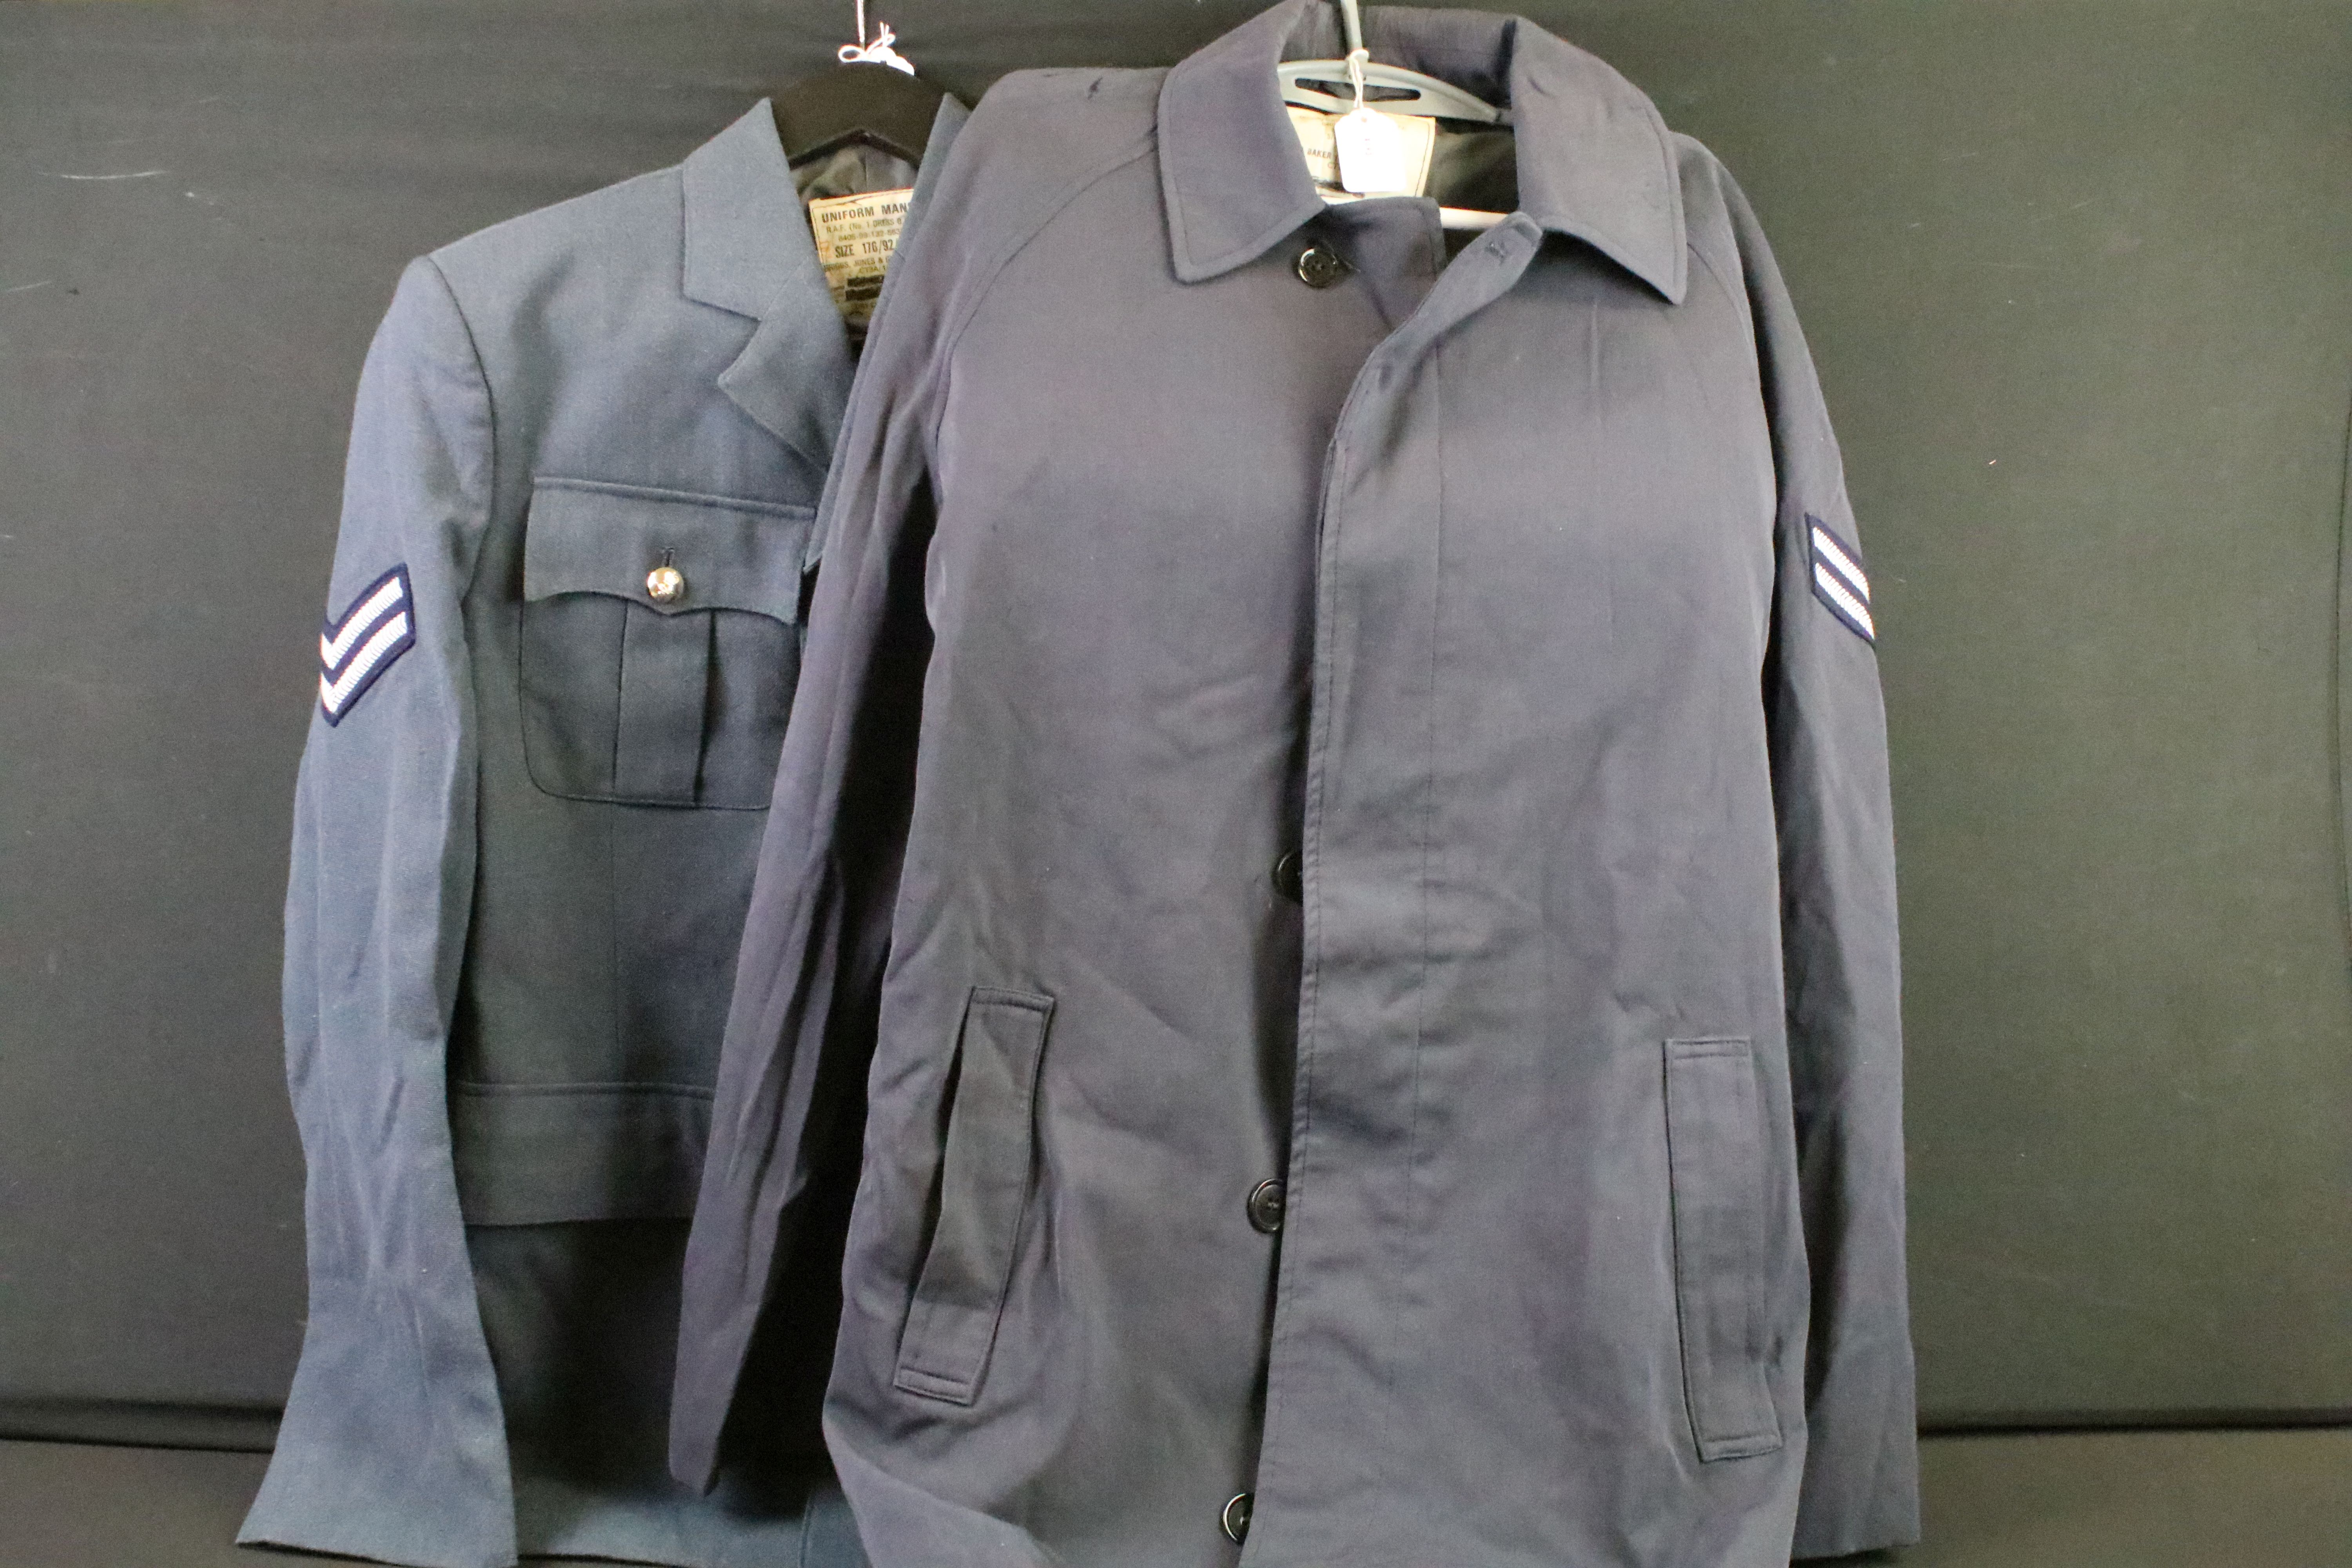 A selection of British Royal Air Force / RAF uniform to include two jackets and an overcoat.